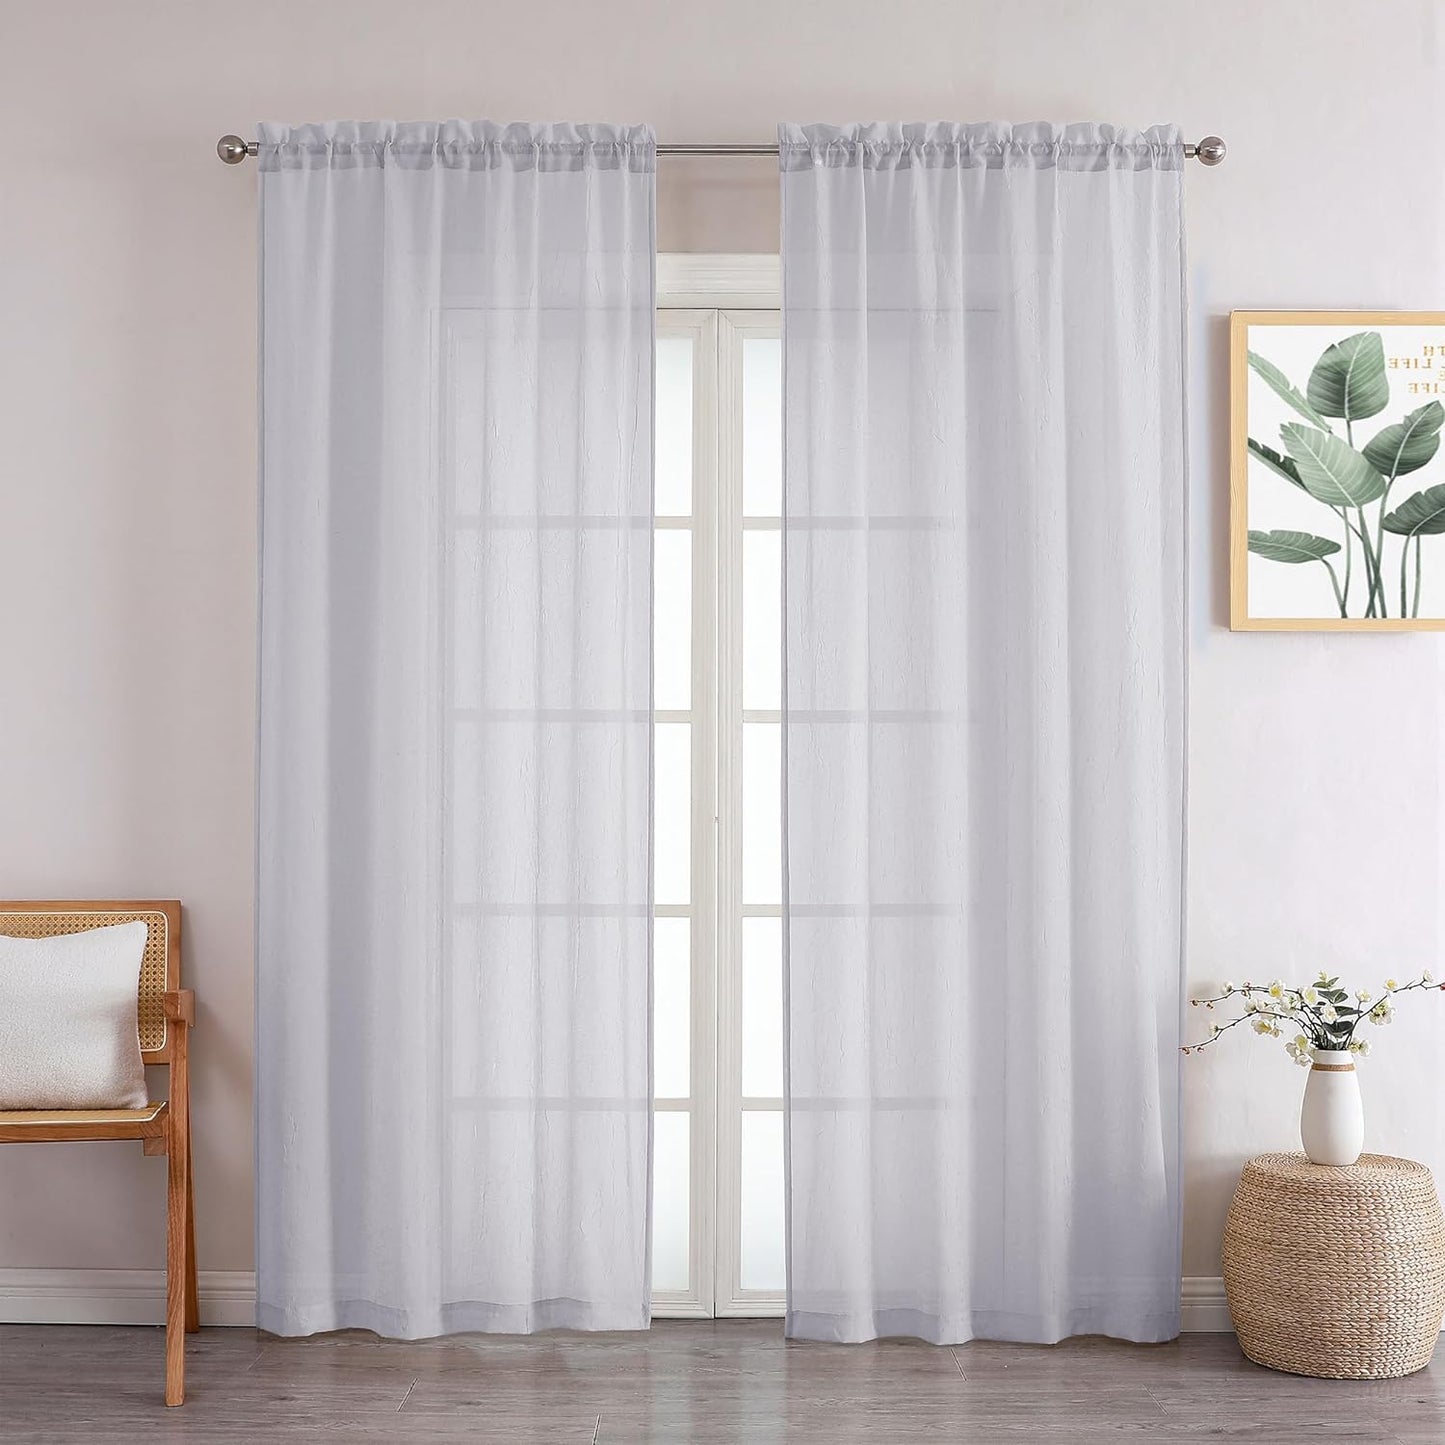 Crushed Sheer White Curtains 63 Inch Length 2 Panels, Light Filtering Solid Crinkle Voile Short Sheer Curtian for Bedroom Living Room, Each 42Wx63L Inches  Chyhomenyc Light Grey 42 W X 72 L 